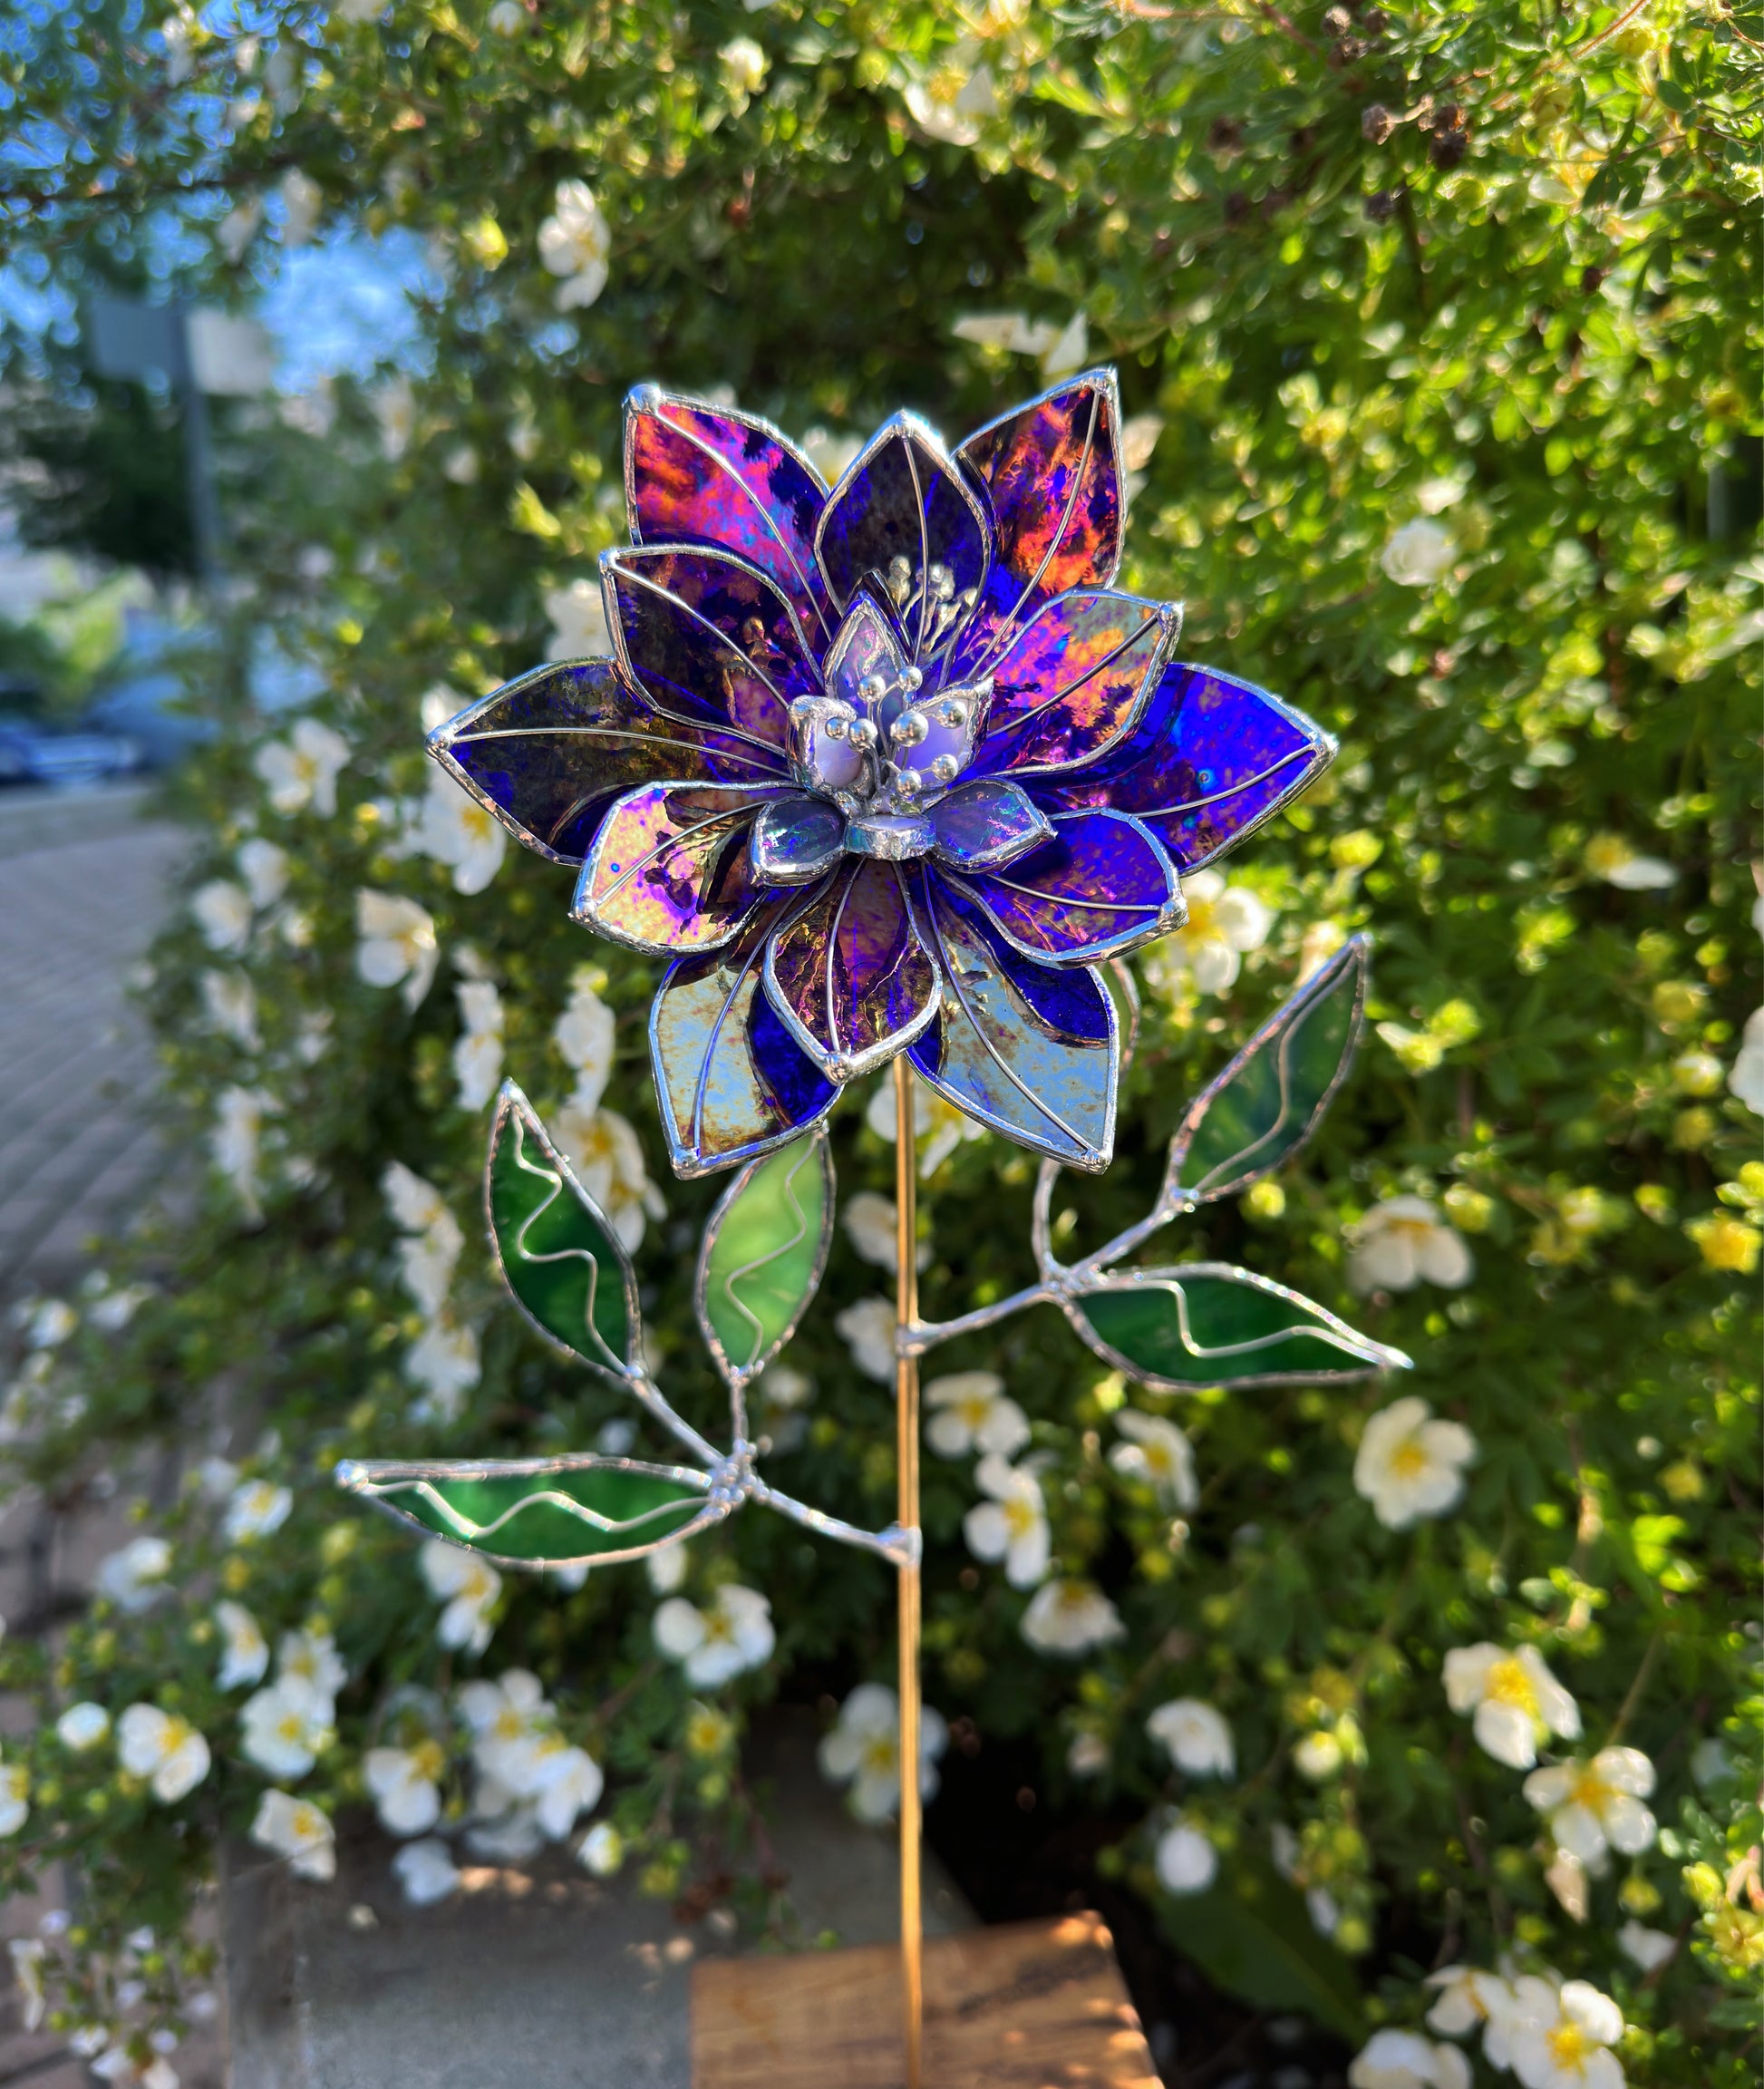 .Amethyst Lily blue Iridescent Stained glass tropical flower 3D, Sun  catcher, Table plant decor, Garden stake, wedding decor, Christmas gift